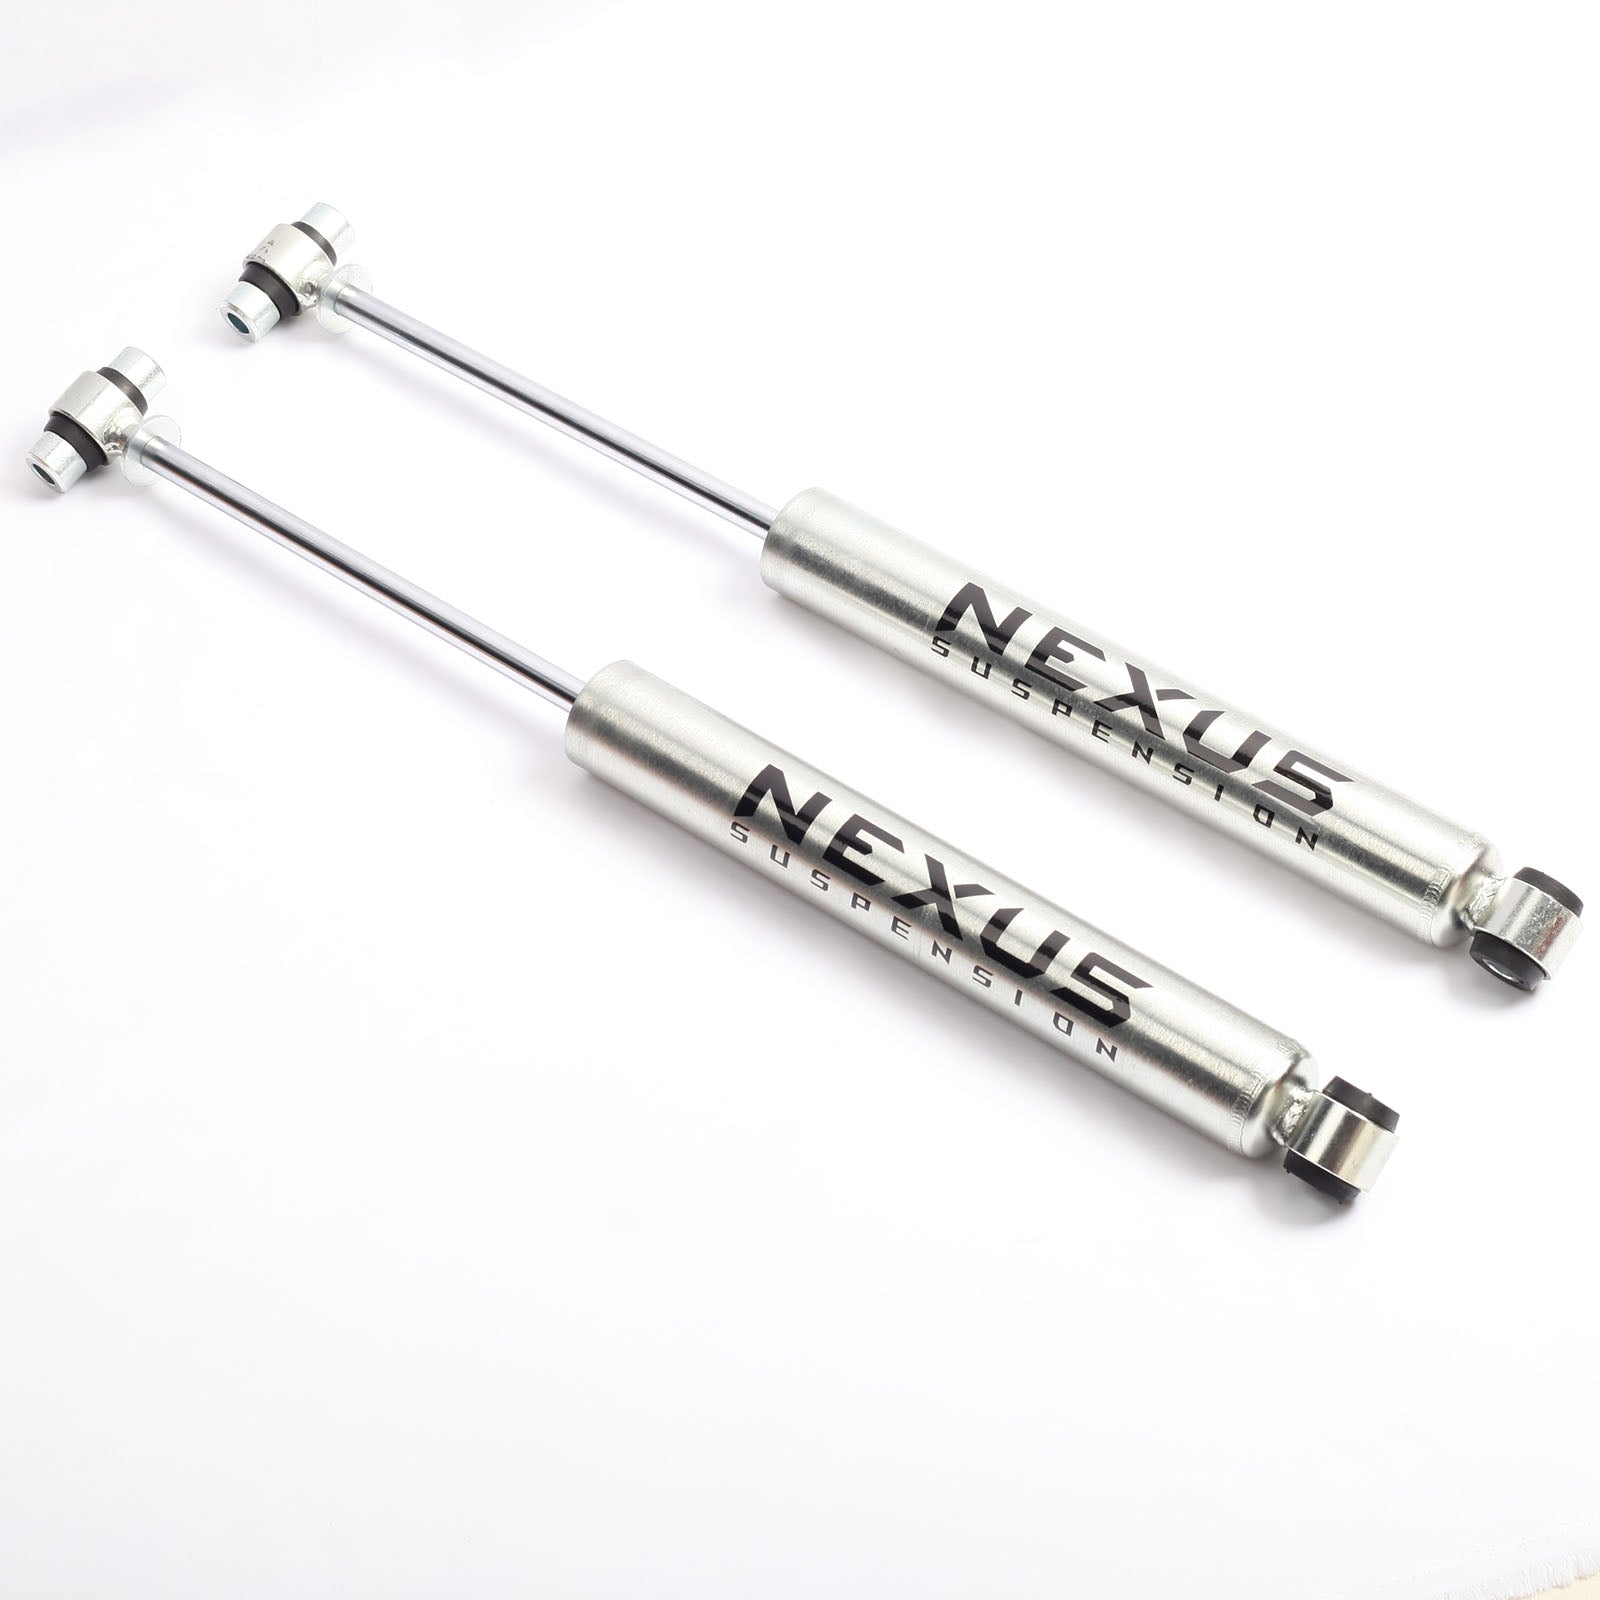 NEXUS SUSPENSION 2 Inch Lift Rear Shock Absorber for 2007-2018 GMC Sierra 1500 2wd/4wd Chevy Silverado 1500 2wd/4wd,Zinc Plated Coating,Pair Pack